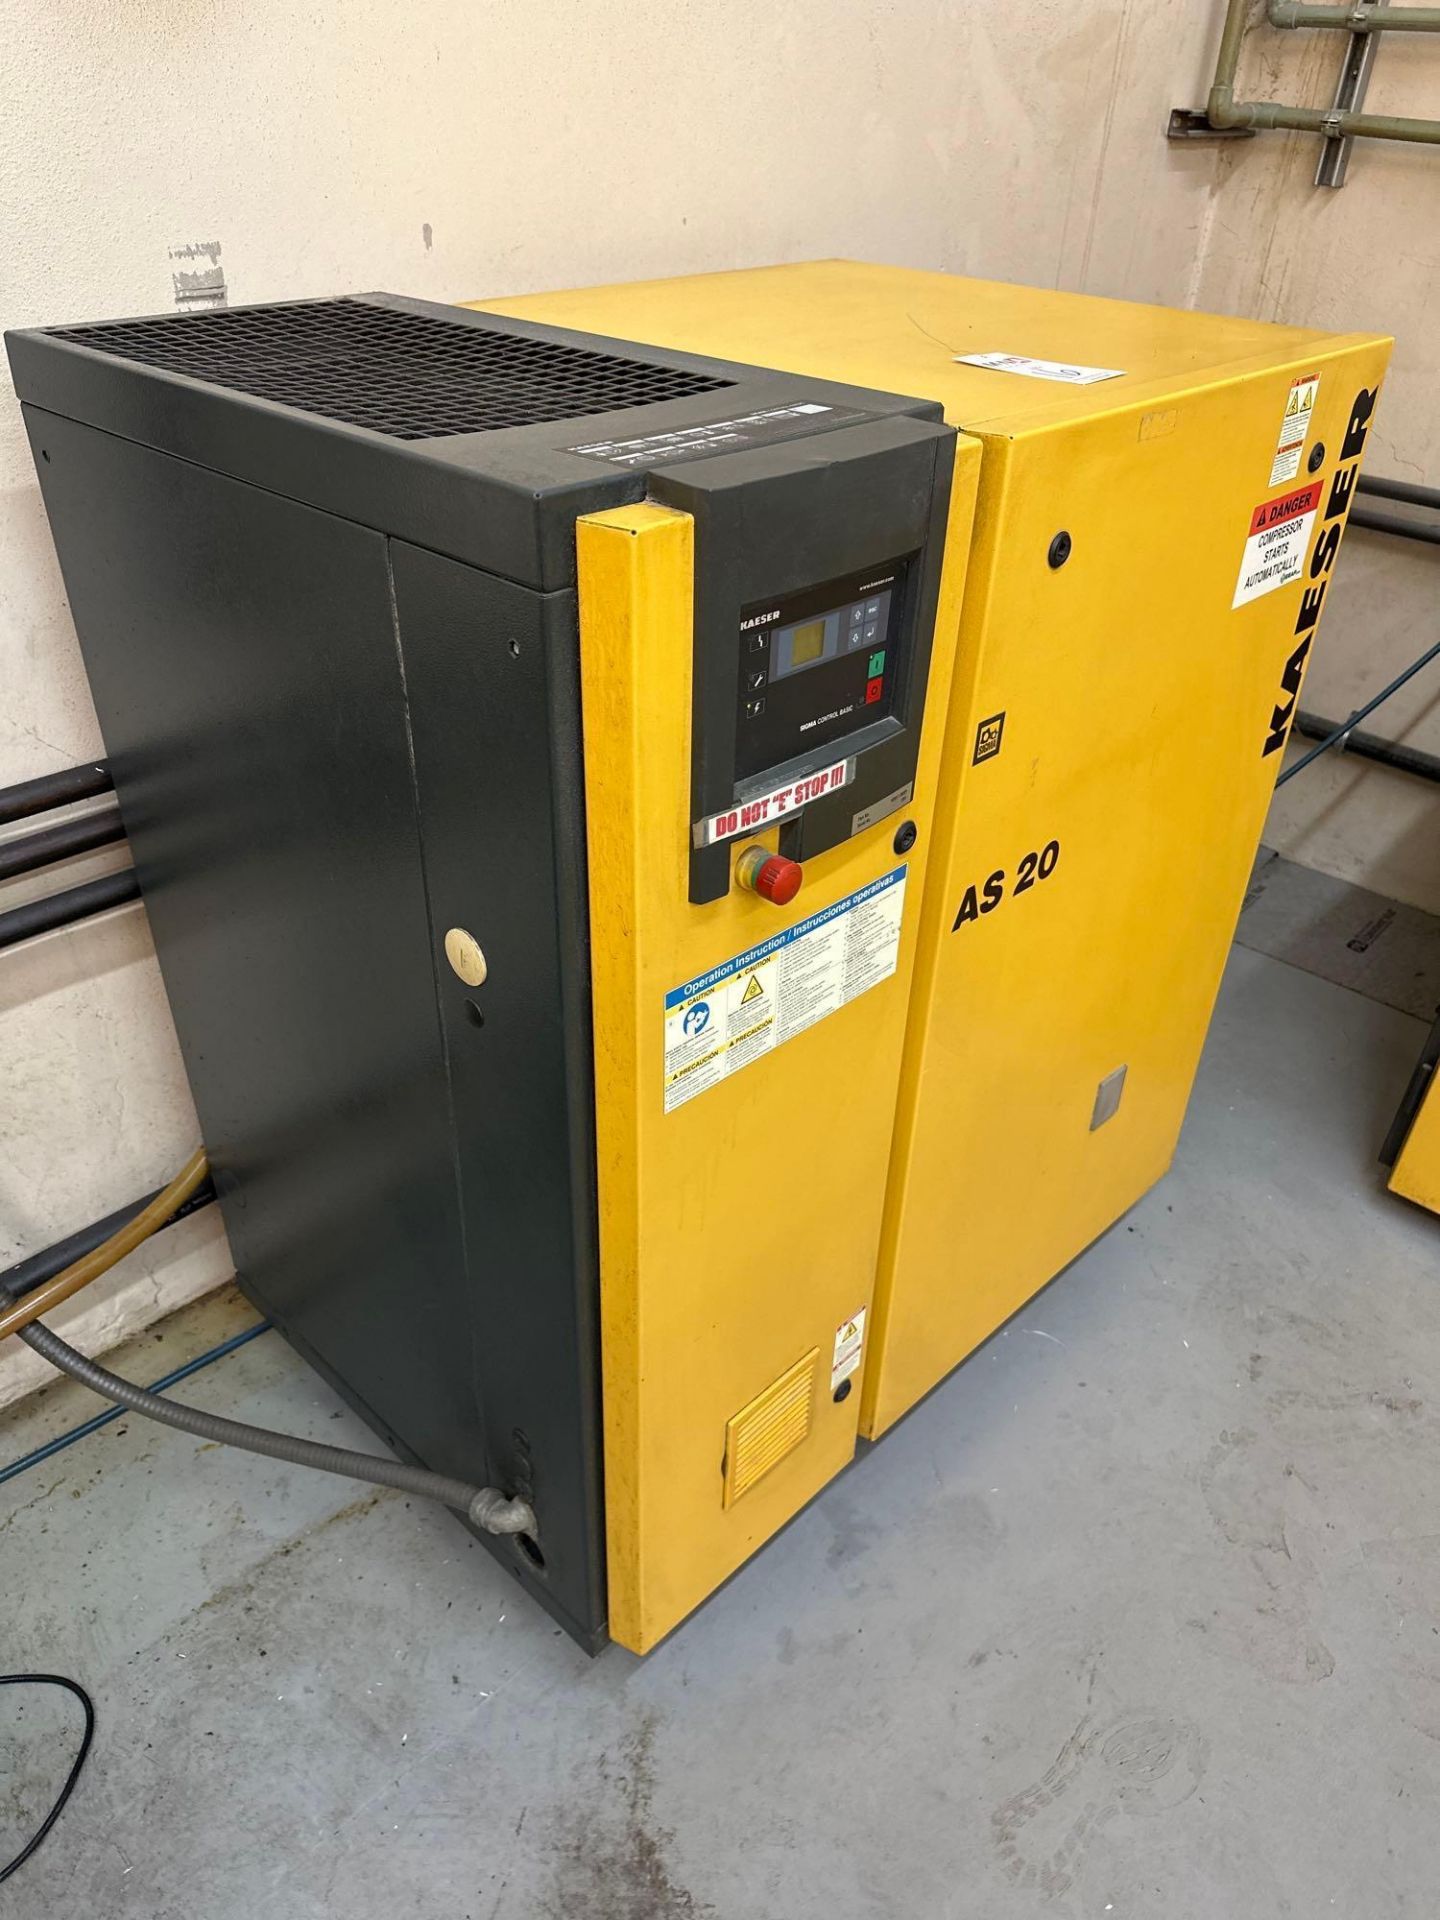 Kaeser AS20 Rotary Screw Air Compressor, 125psig, 20hp, 3555rpm, 32094hrs, s/n 1361 - Image 2 of 6